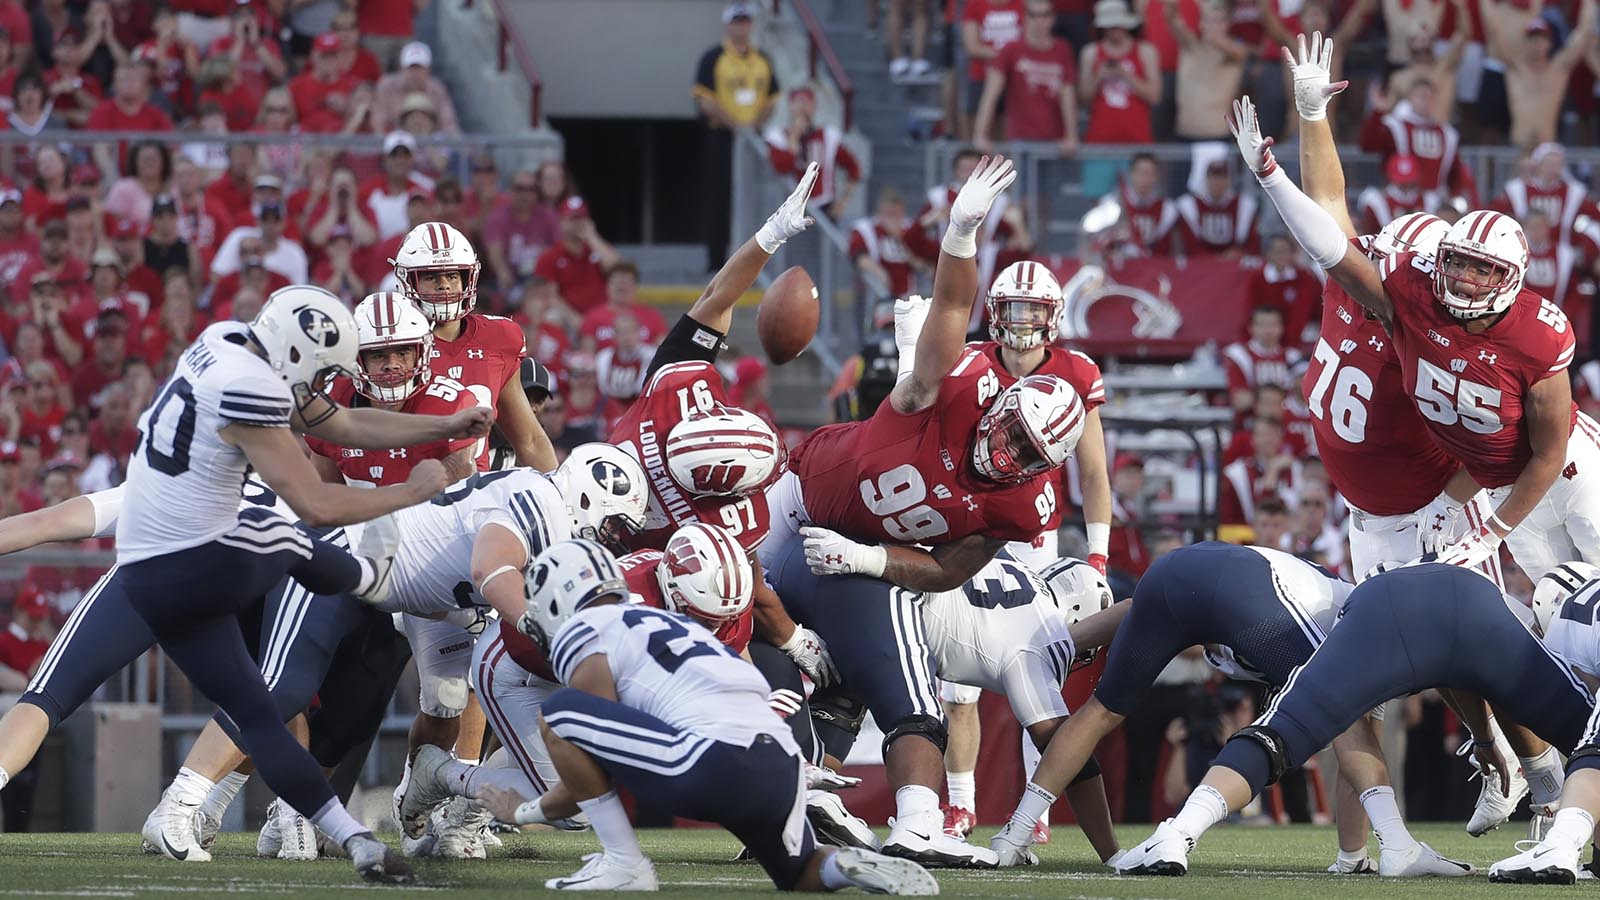 Upon Further Review: Badgers vs. BYU